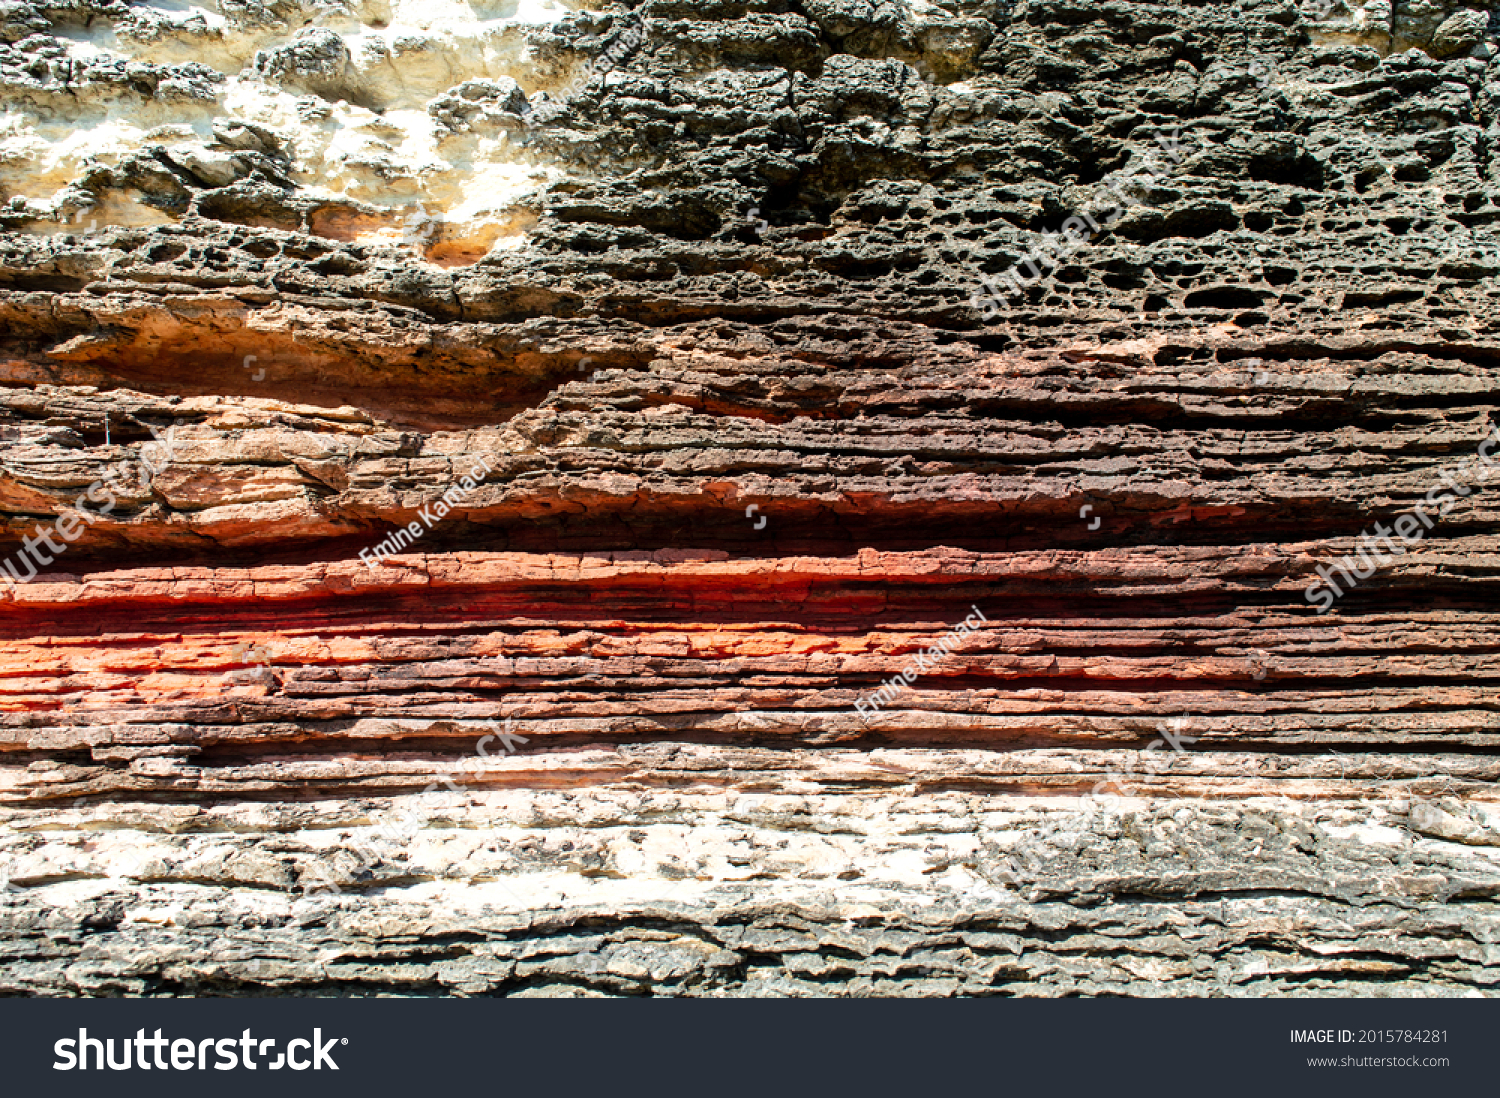 Layers of sedimentary sandstone rock. rock formations in red, white and gray. structure background #2015784281